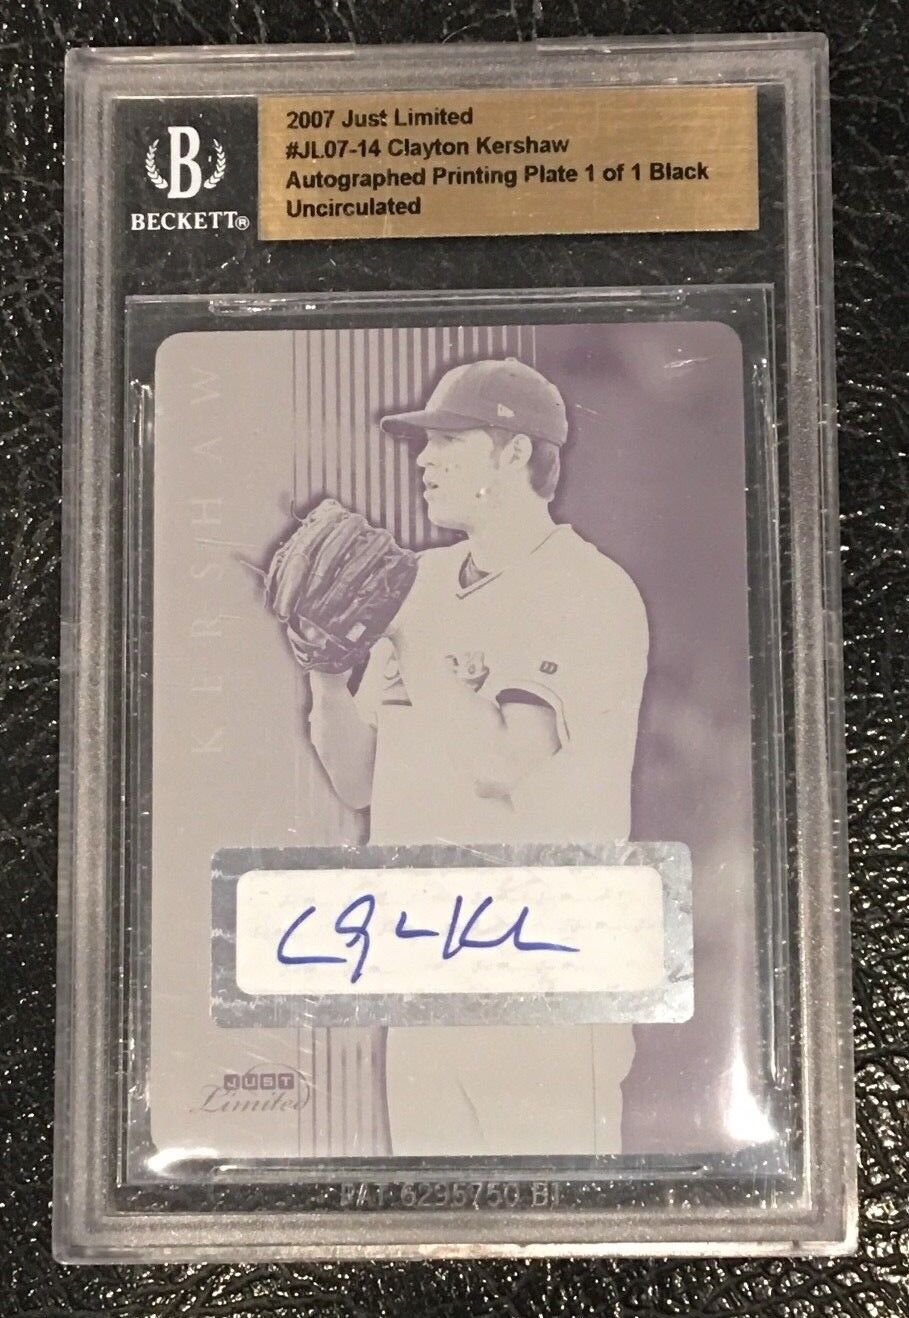  Clayton Kershaw 2007 JUST MINORS 1/1 BGS UNCIRCULATED PRINT PLATE AUTO ROOKIE